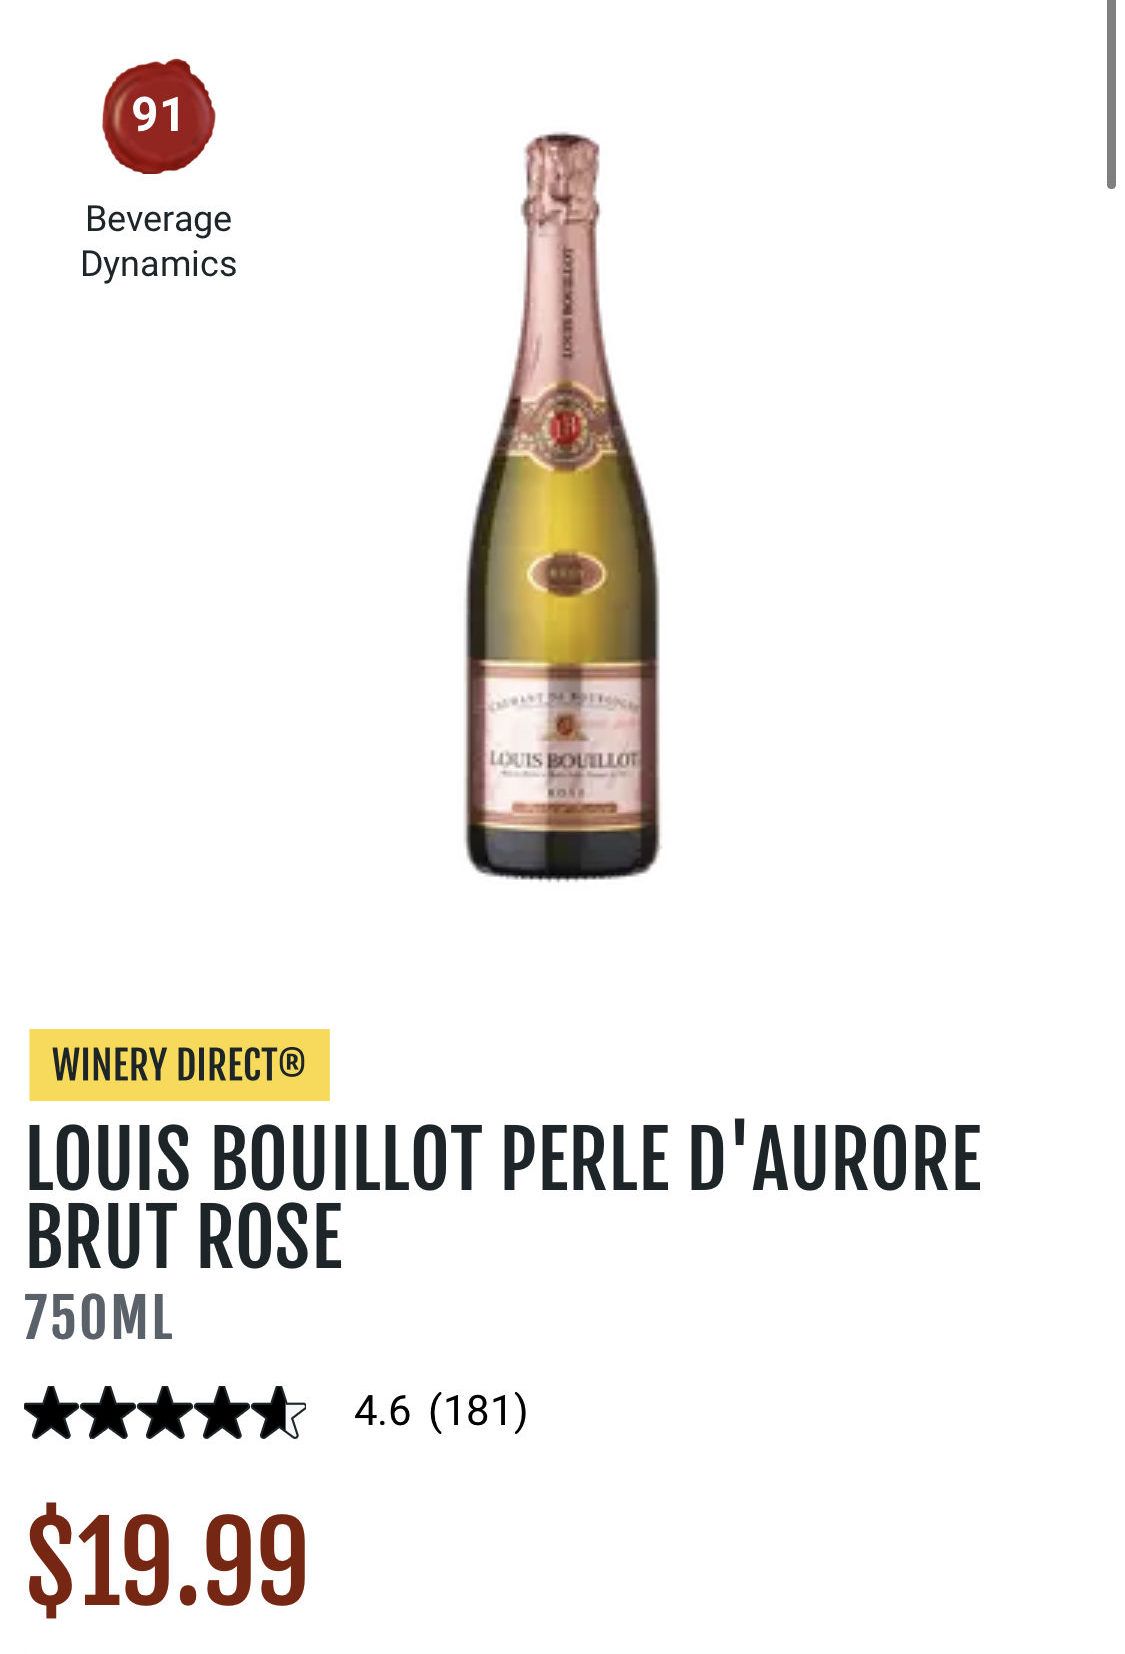 a bottle of champagne with text